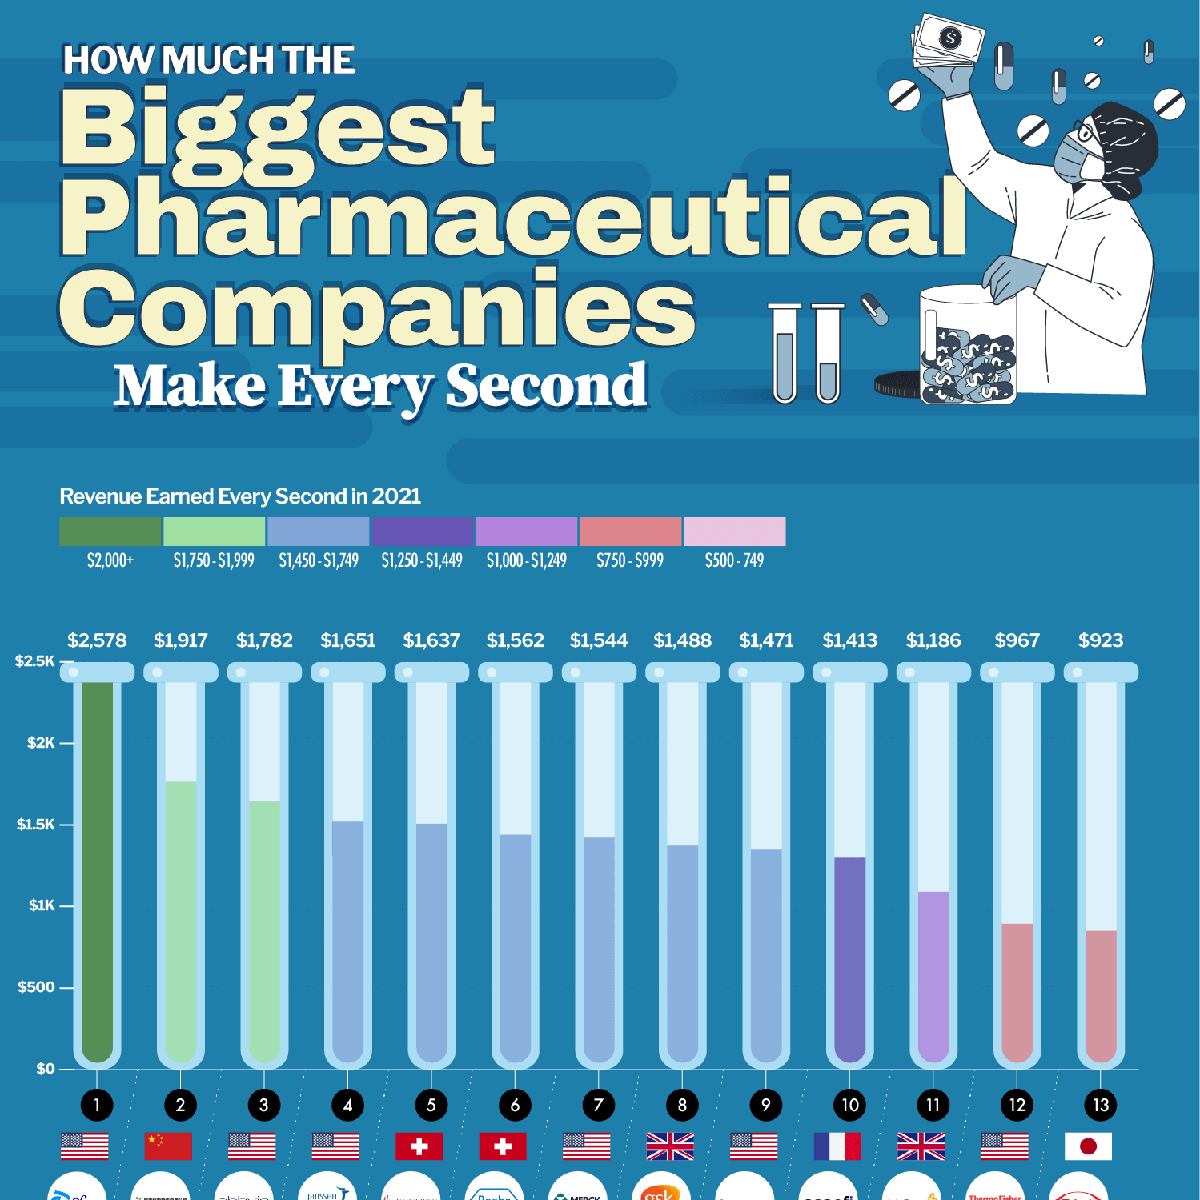 How Much the Biggest Pharmaceutical Companies Make Every Second